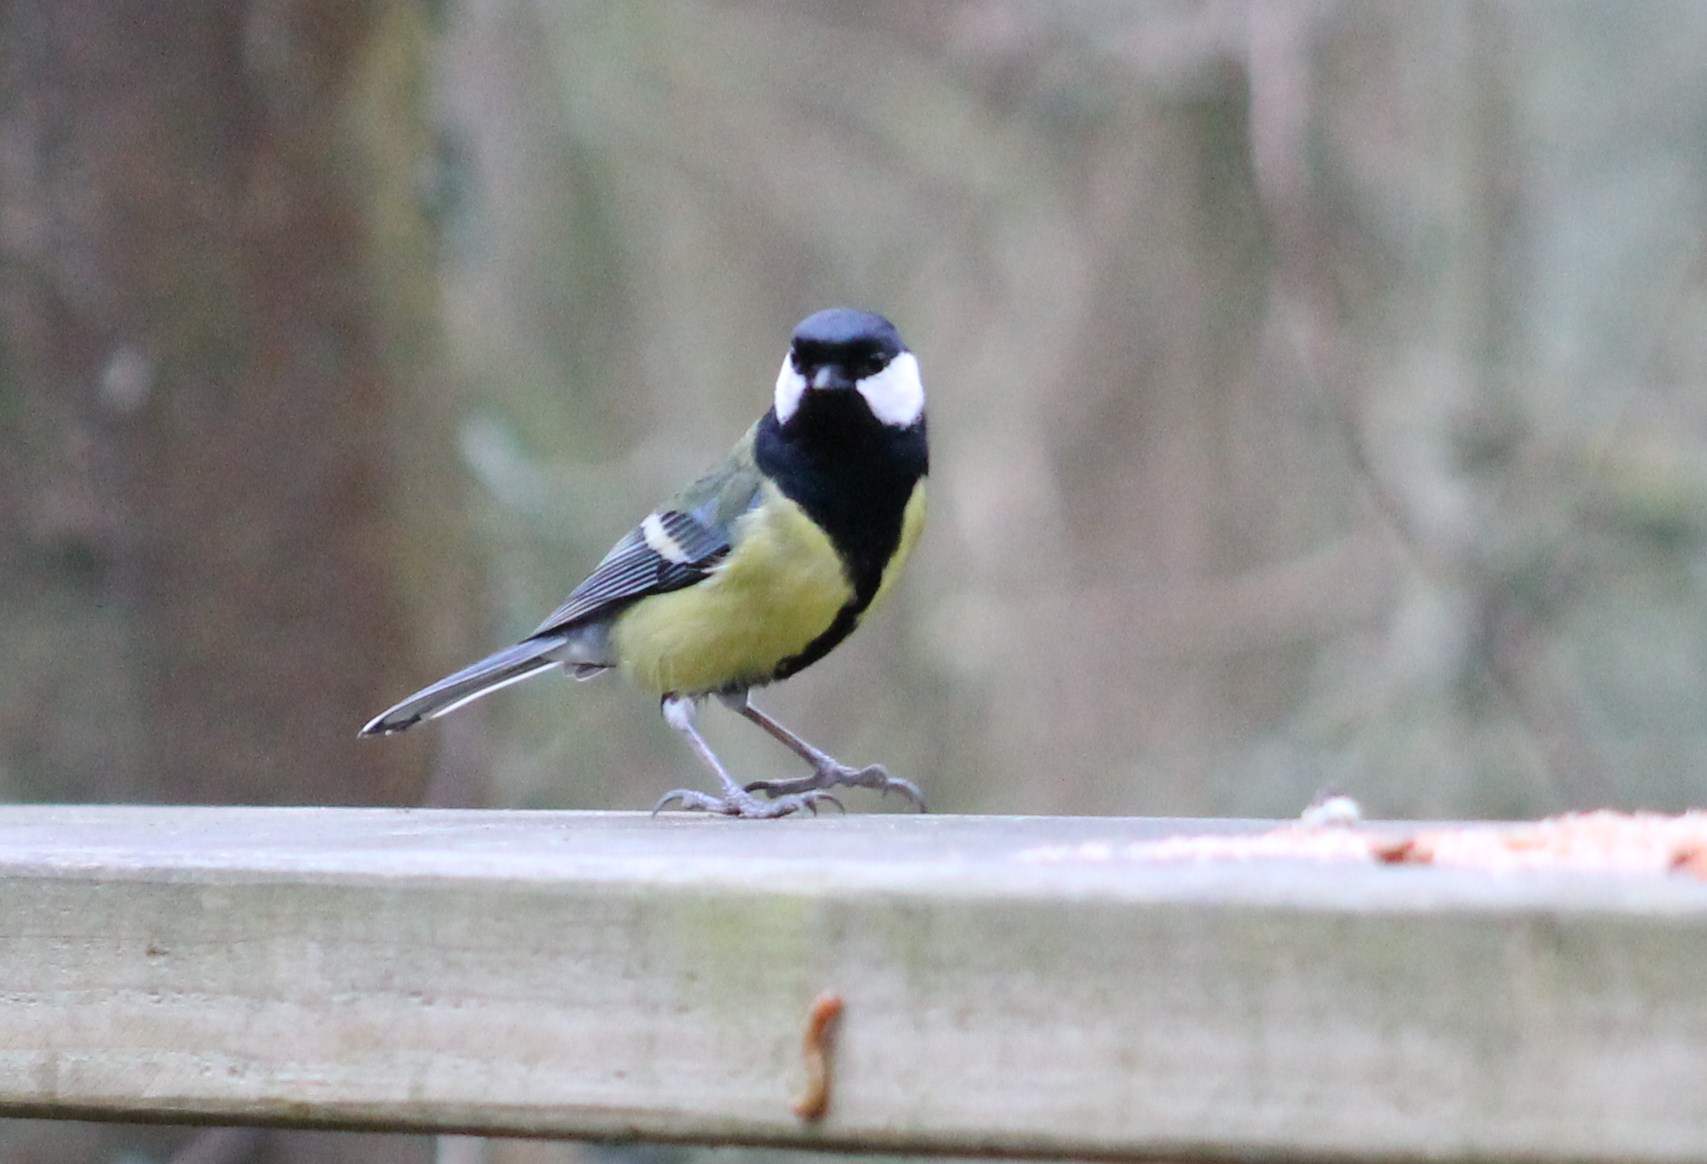 Coal tit or Great tit? - Identify this - Wildlife - The RSPB Community